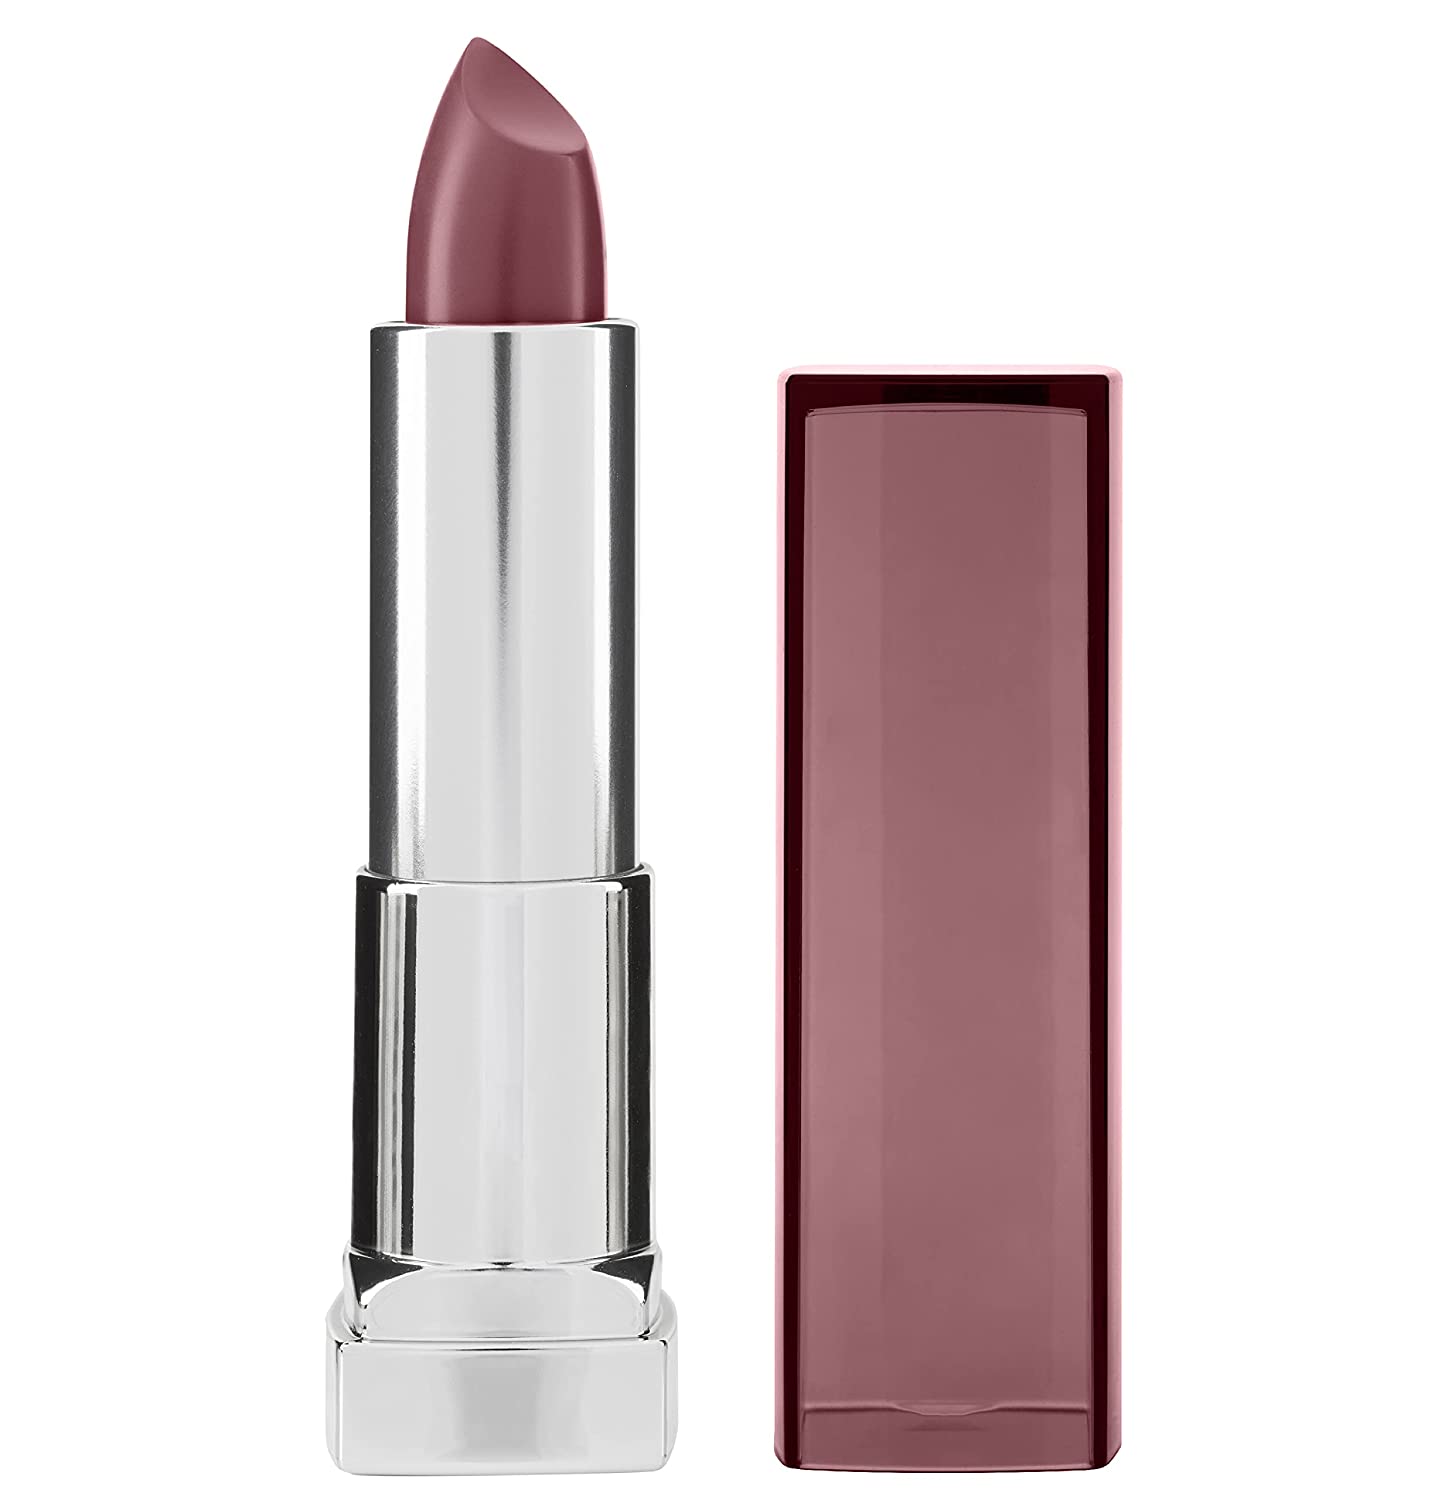 Maybelline New York Color Sensational Smoked Roses Lipstick 300 Stripped Rose 22.1 g, ‎300